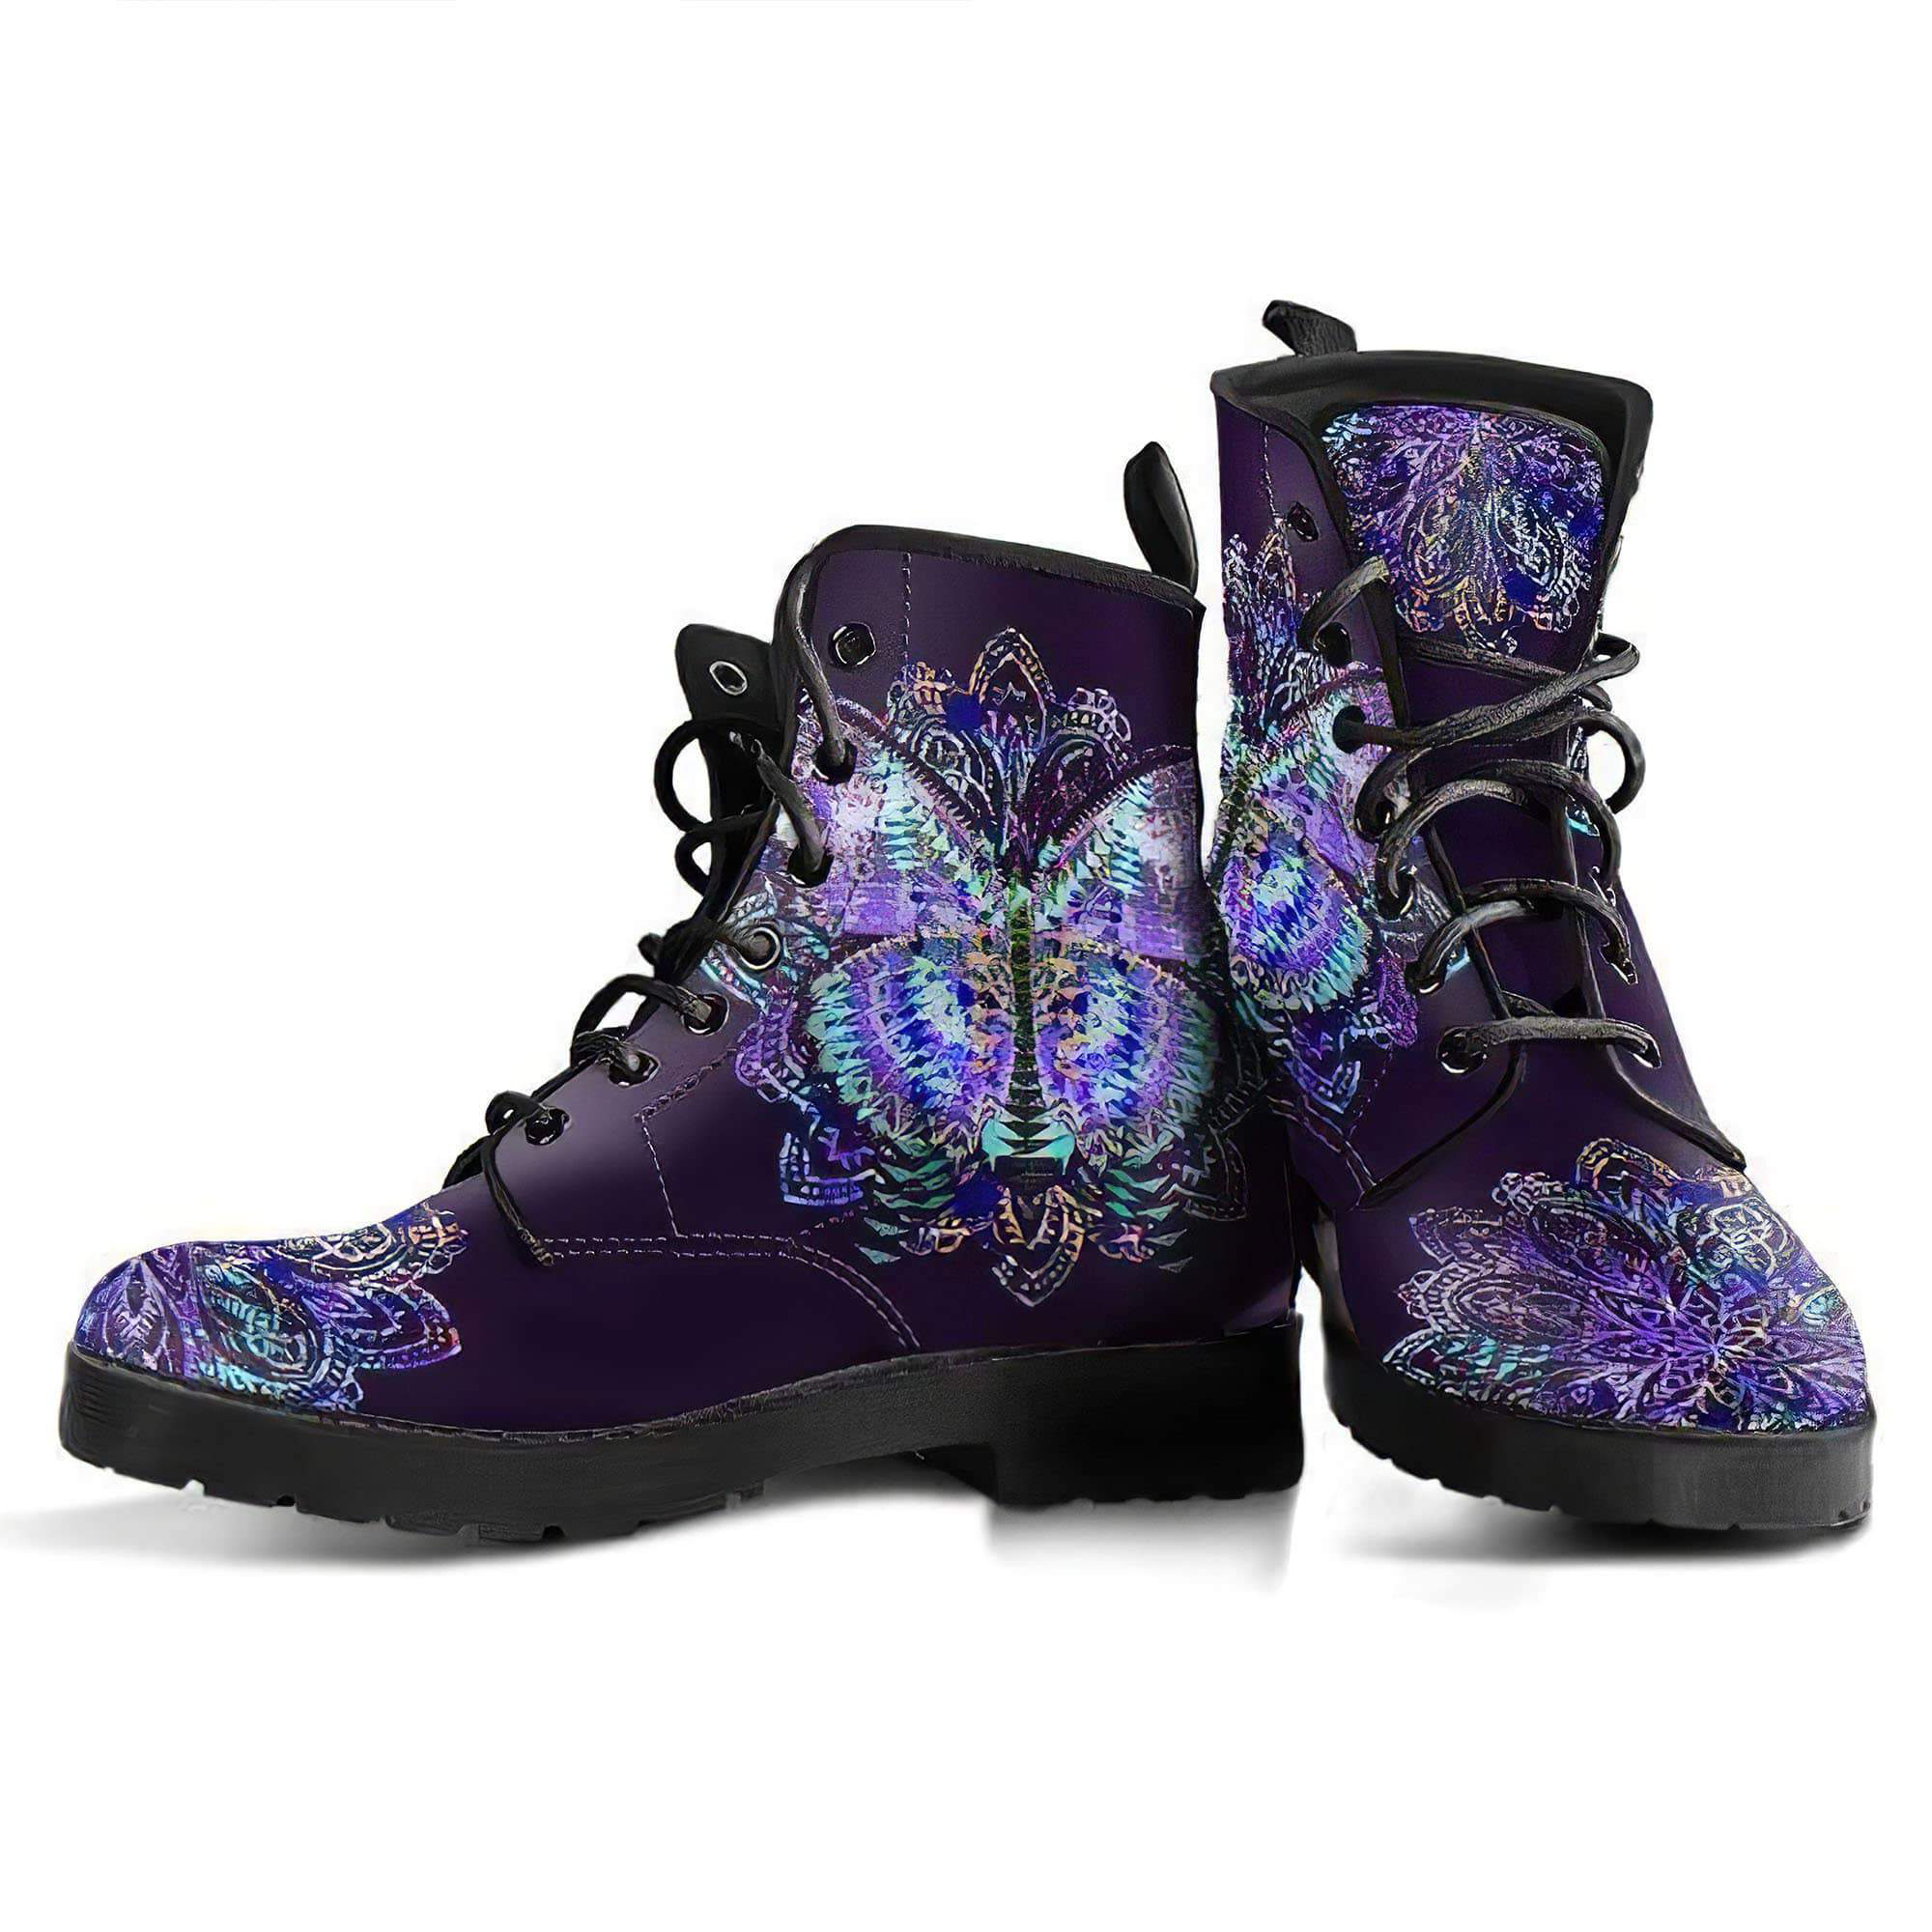 purple-boho-butterfly-handcrafted-boots-women-s-leather-boots-12051932839997.jpg